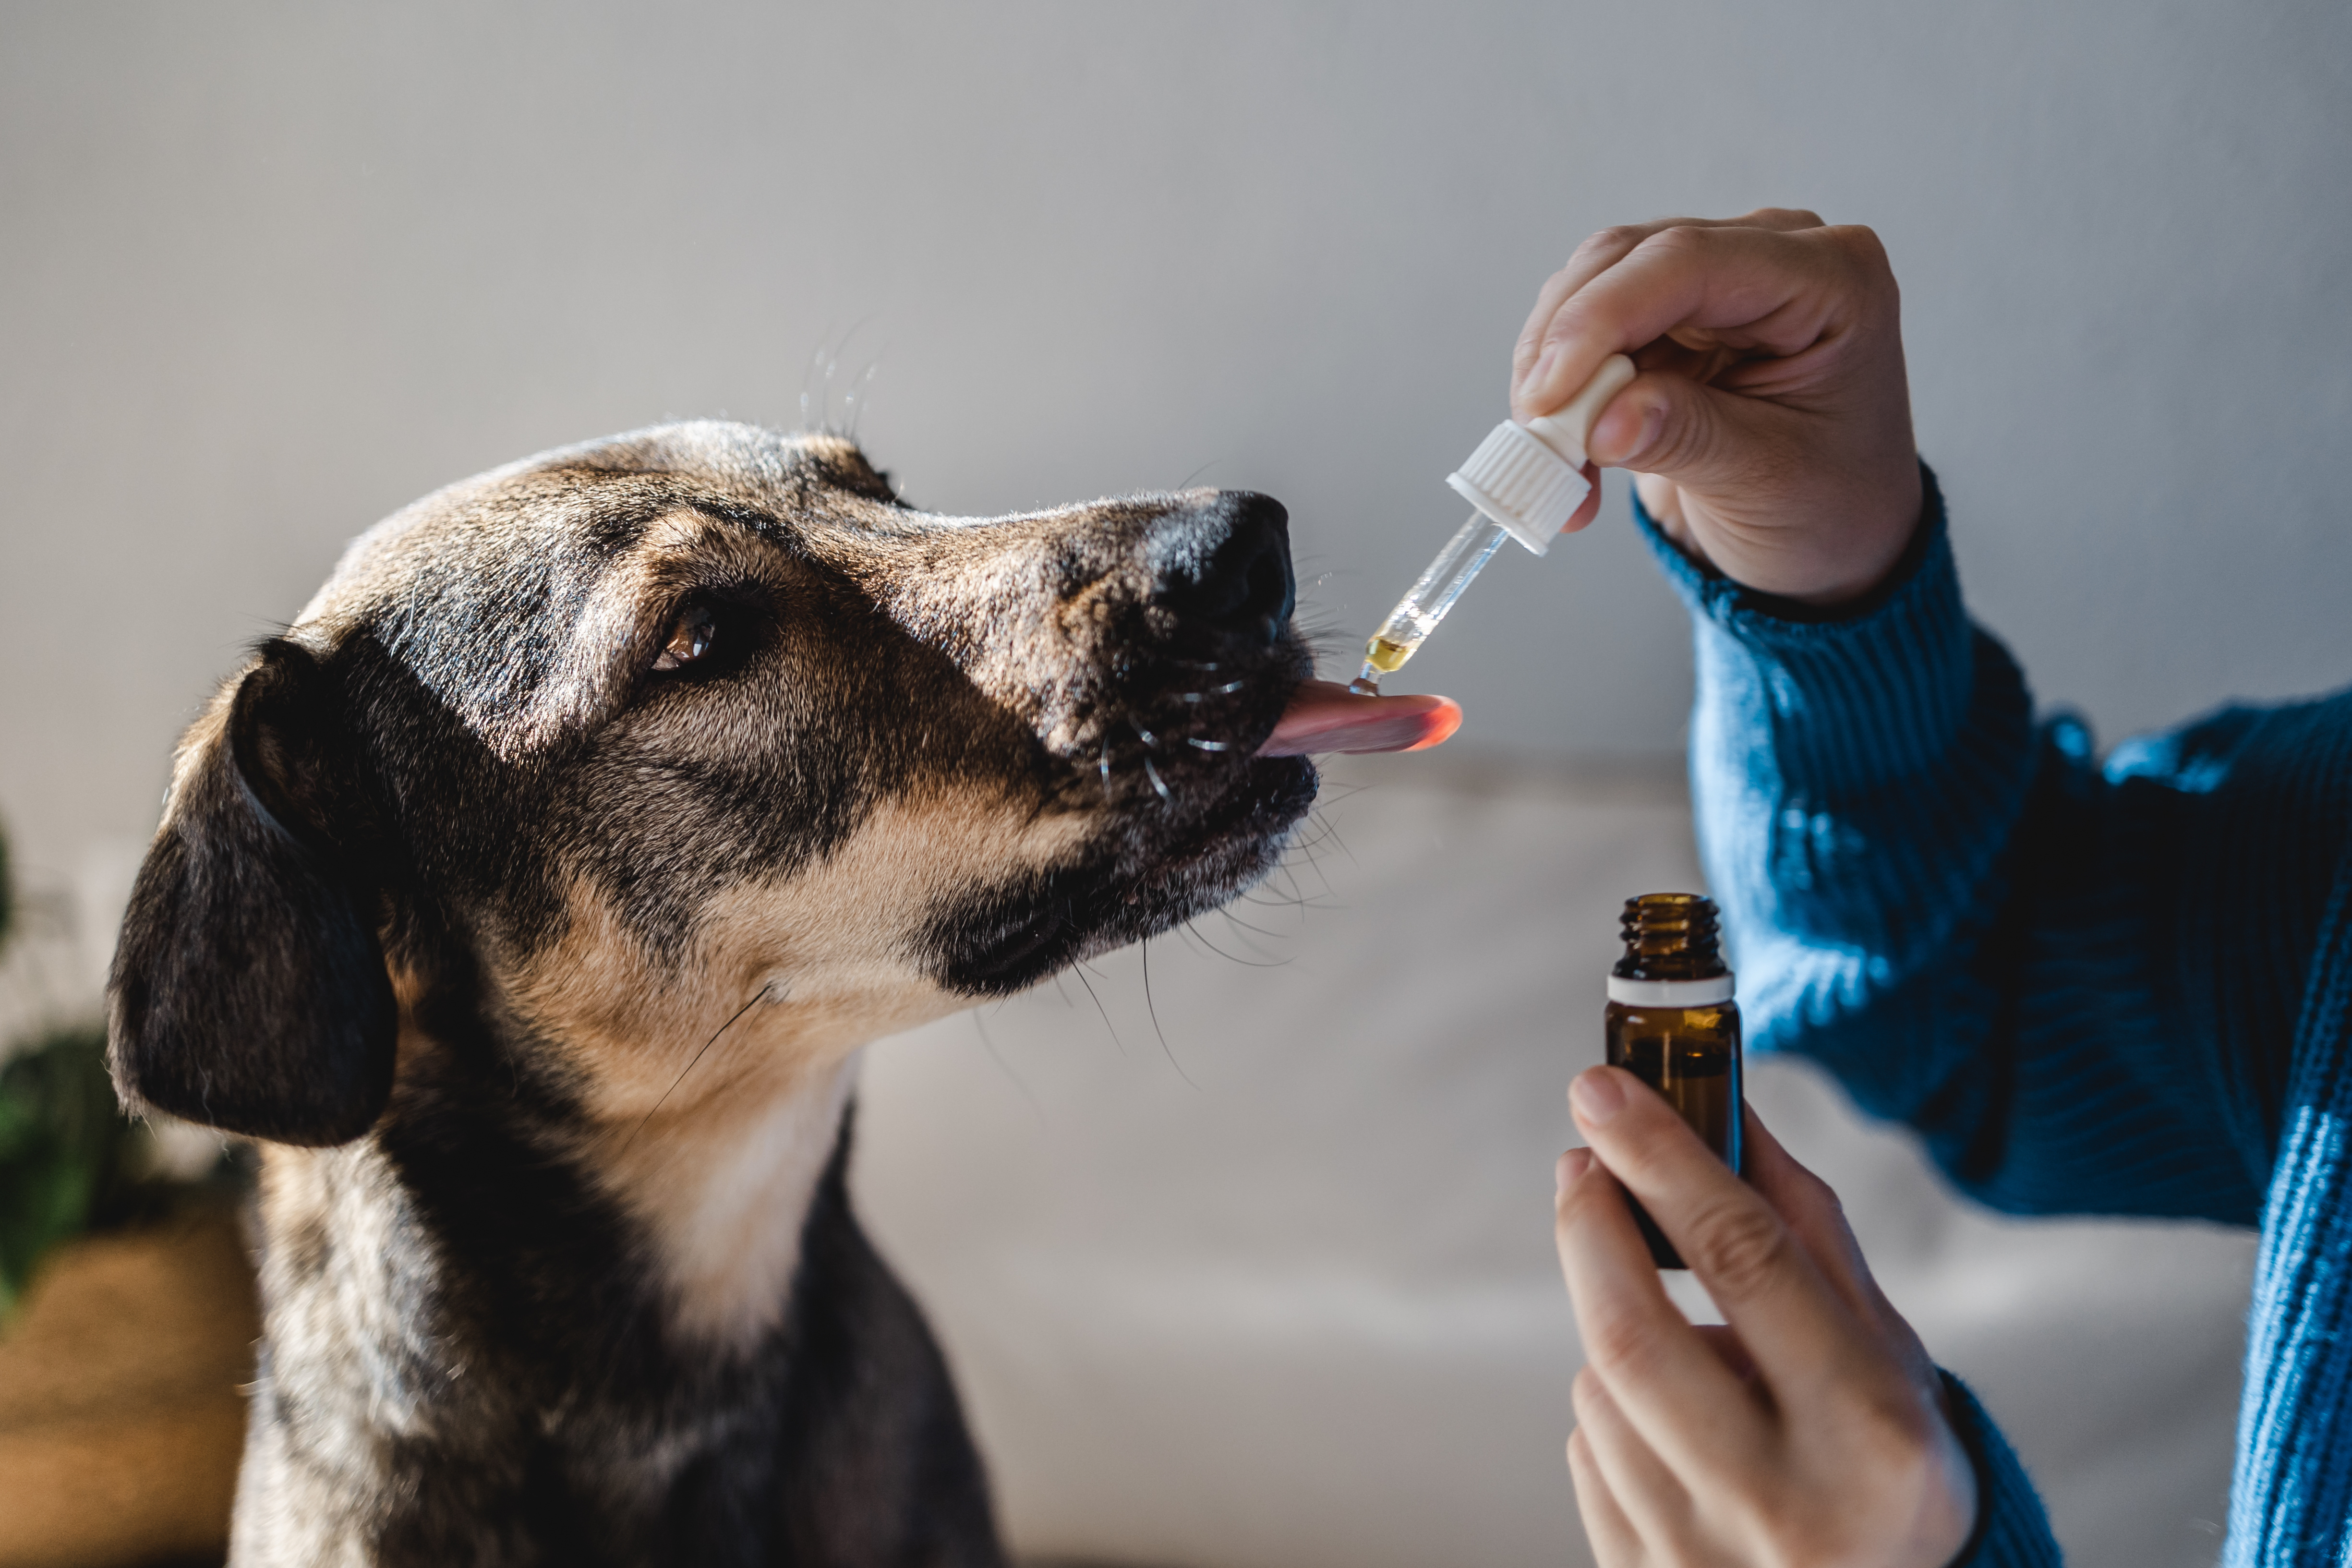 Types of Alternative Therapies and Treatments for Pets